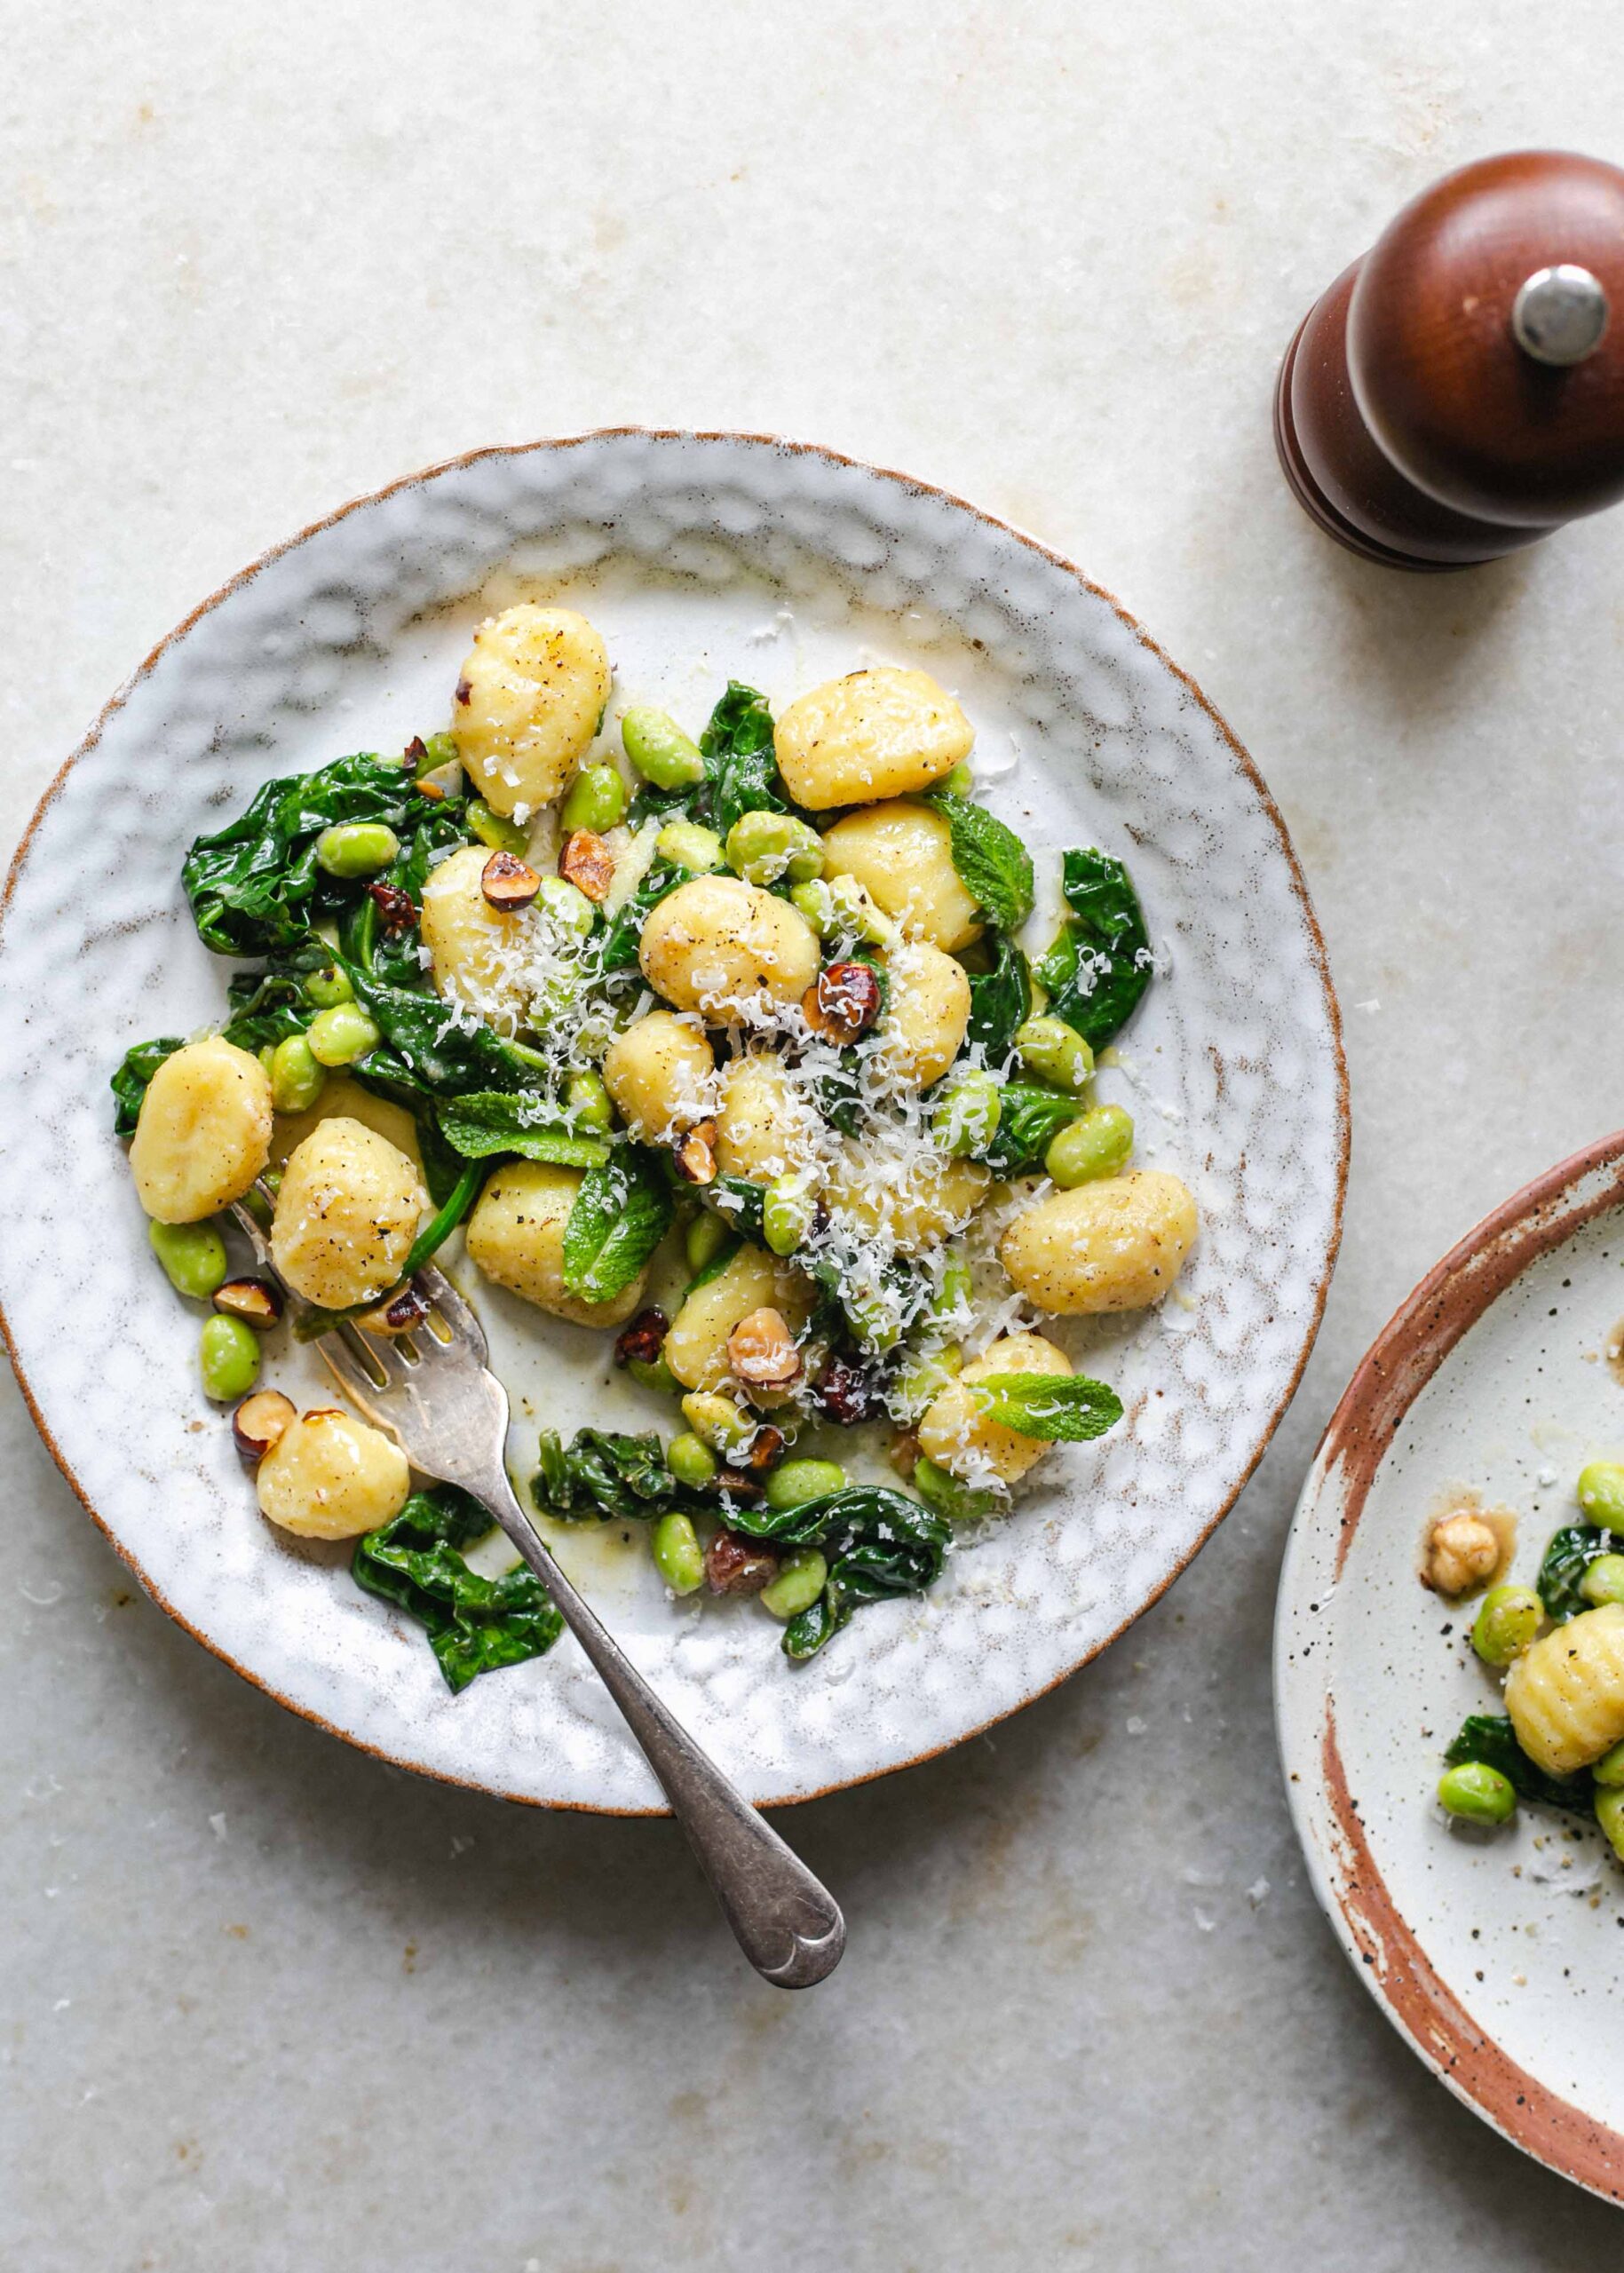 A plate of gluten free gnocchi with brown butter and spinach and grated cheese